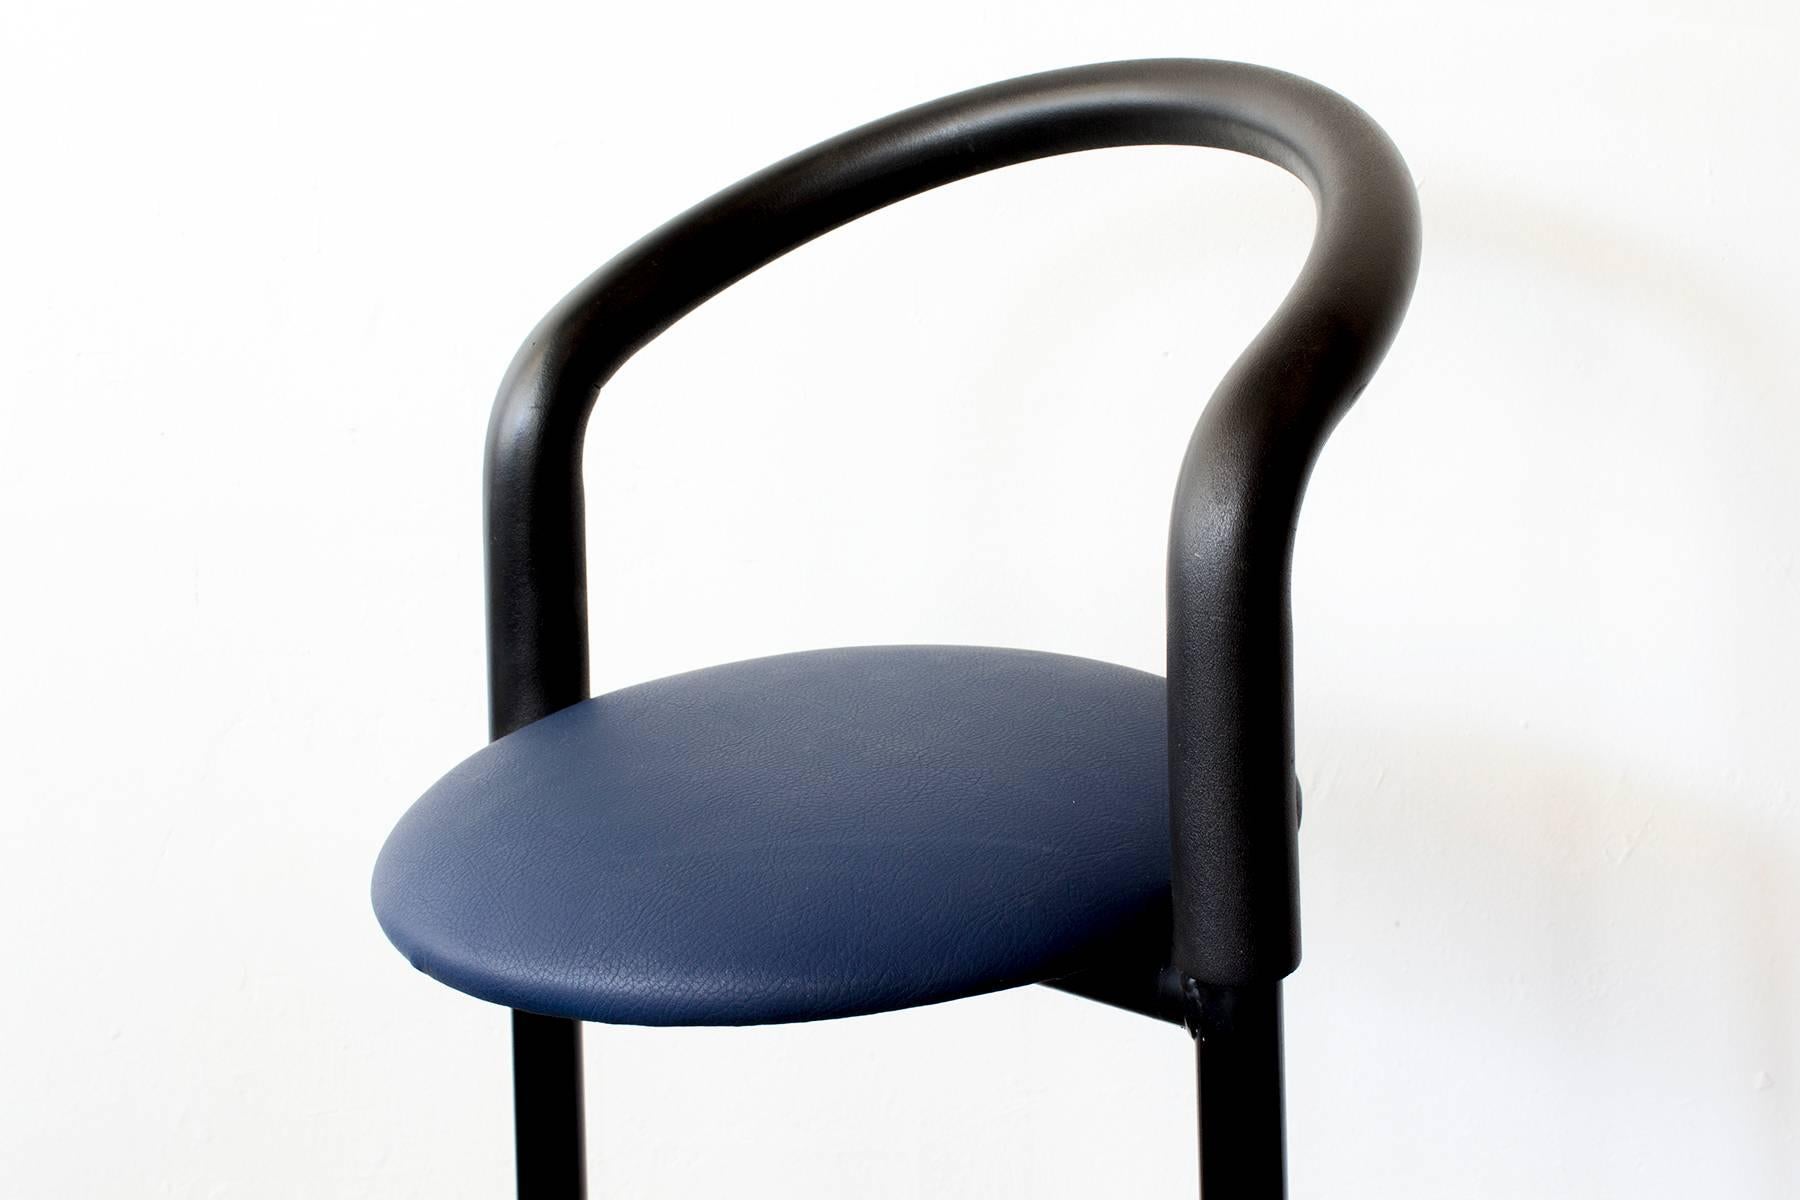 This vintage stool features bold geometric shapes and a tubular steel frame, reminiscent of celebrated 1980s Memphis Group designs from Italy. We updated this graphic piece with a newly reupholstered seat in pebbled blue vinyl. 

Dimensions: 20